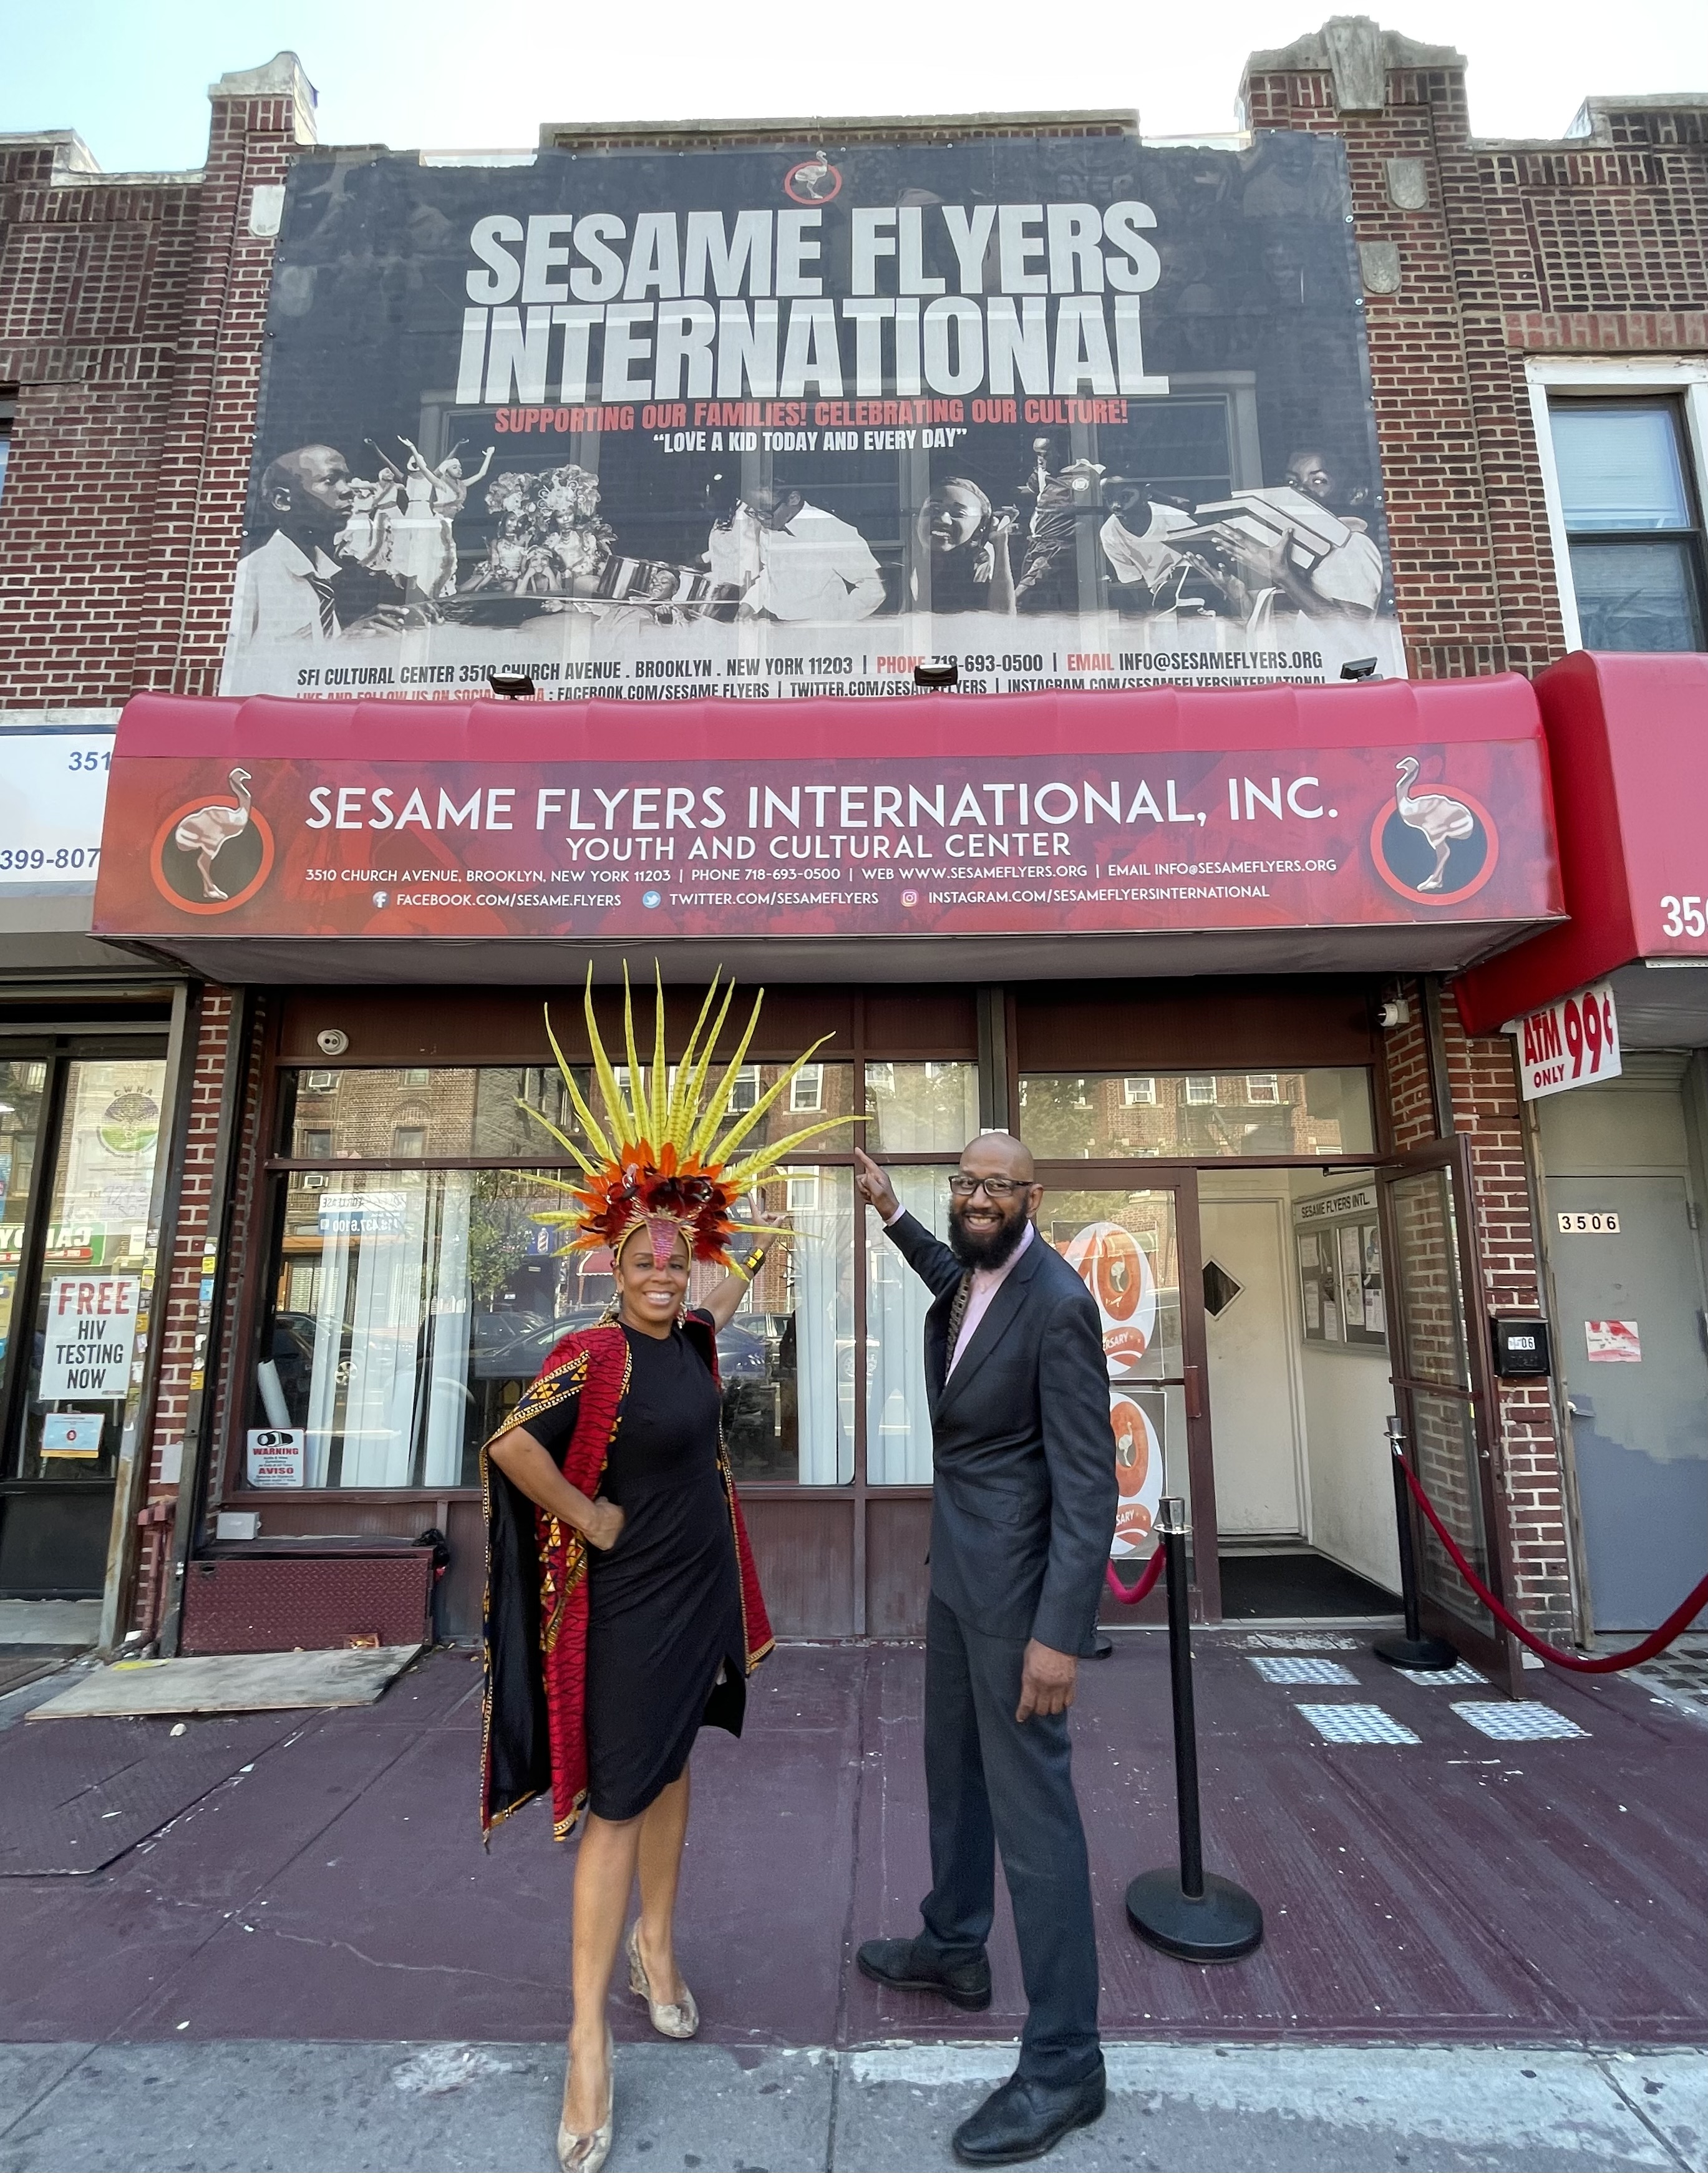 Commissioner Cumbo and Curtis Nelson point at the Sesame Flyers building sign.